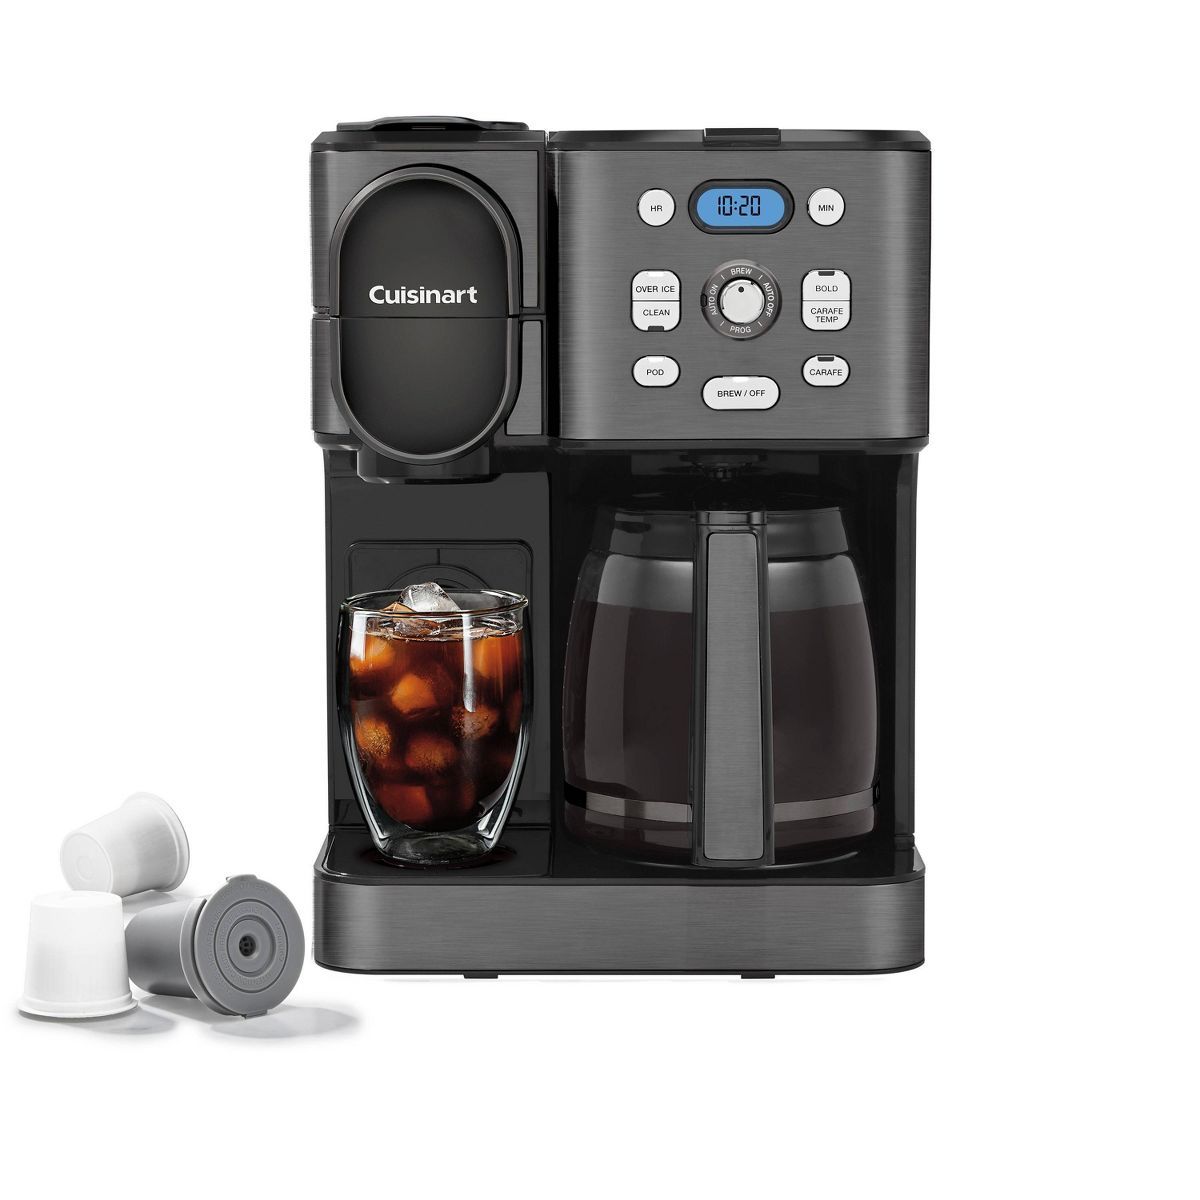 Cuisinart 12 Cup Coffee Maker and Single-Serve Brewer - Black Stainless Steel - SS-16BKS | Target